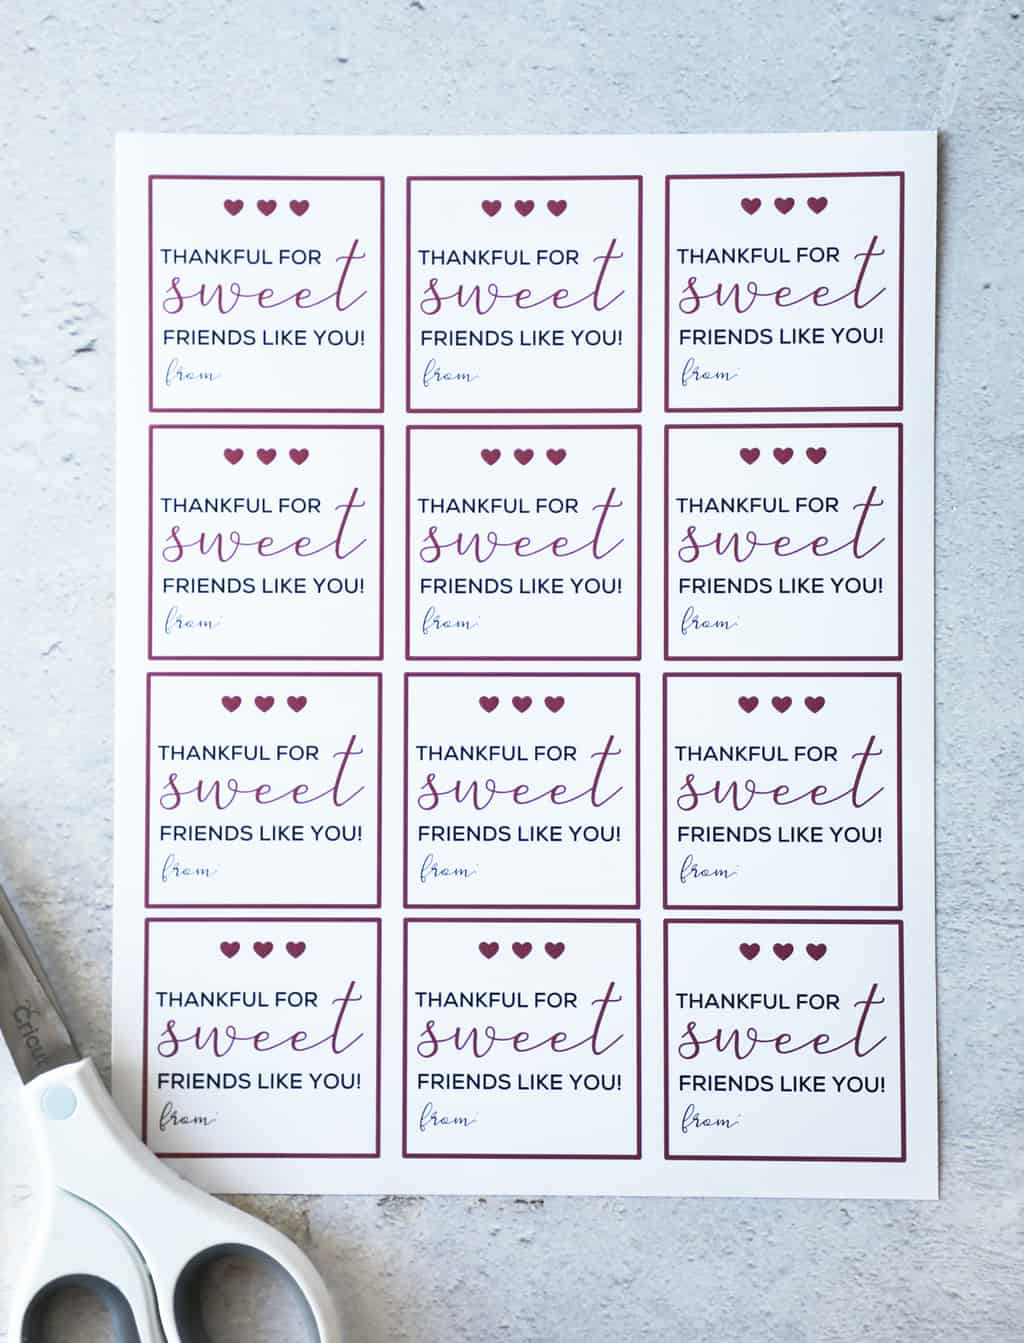 image of free printable gift tags lying on a concrete table